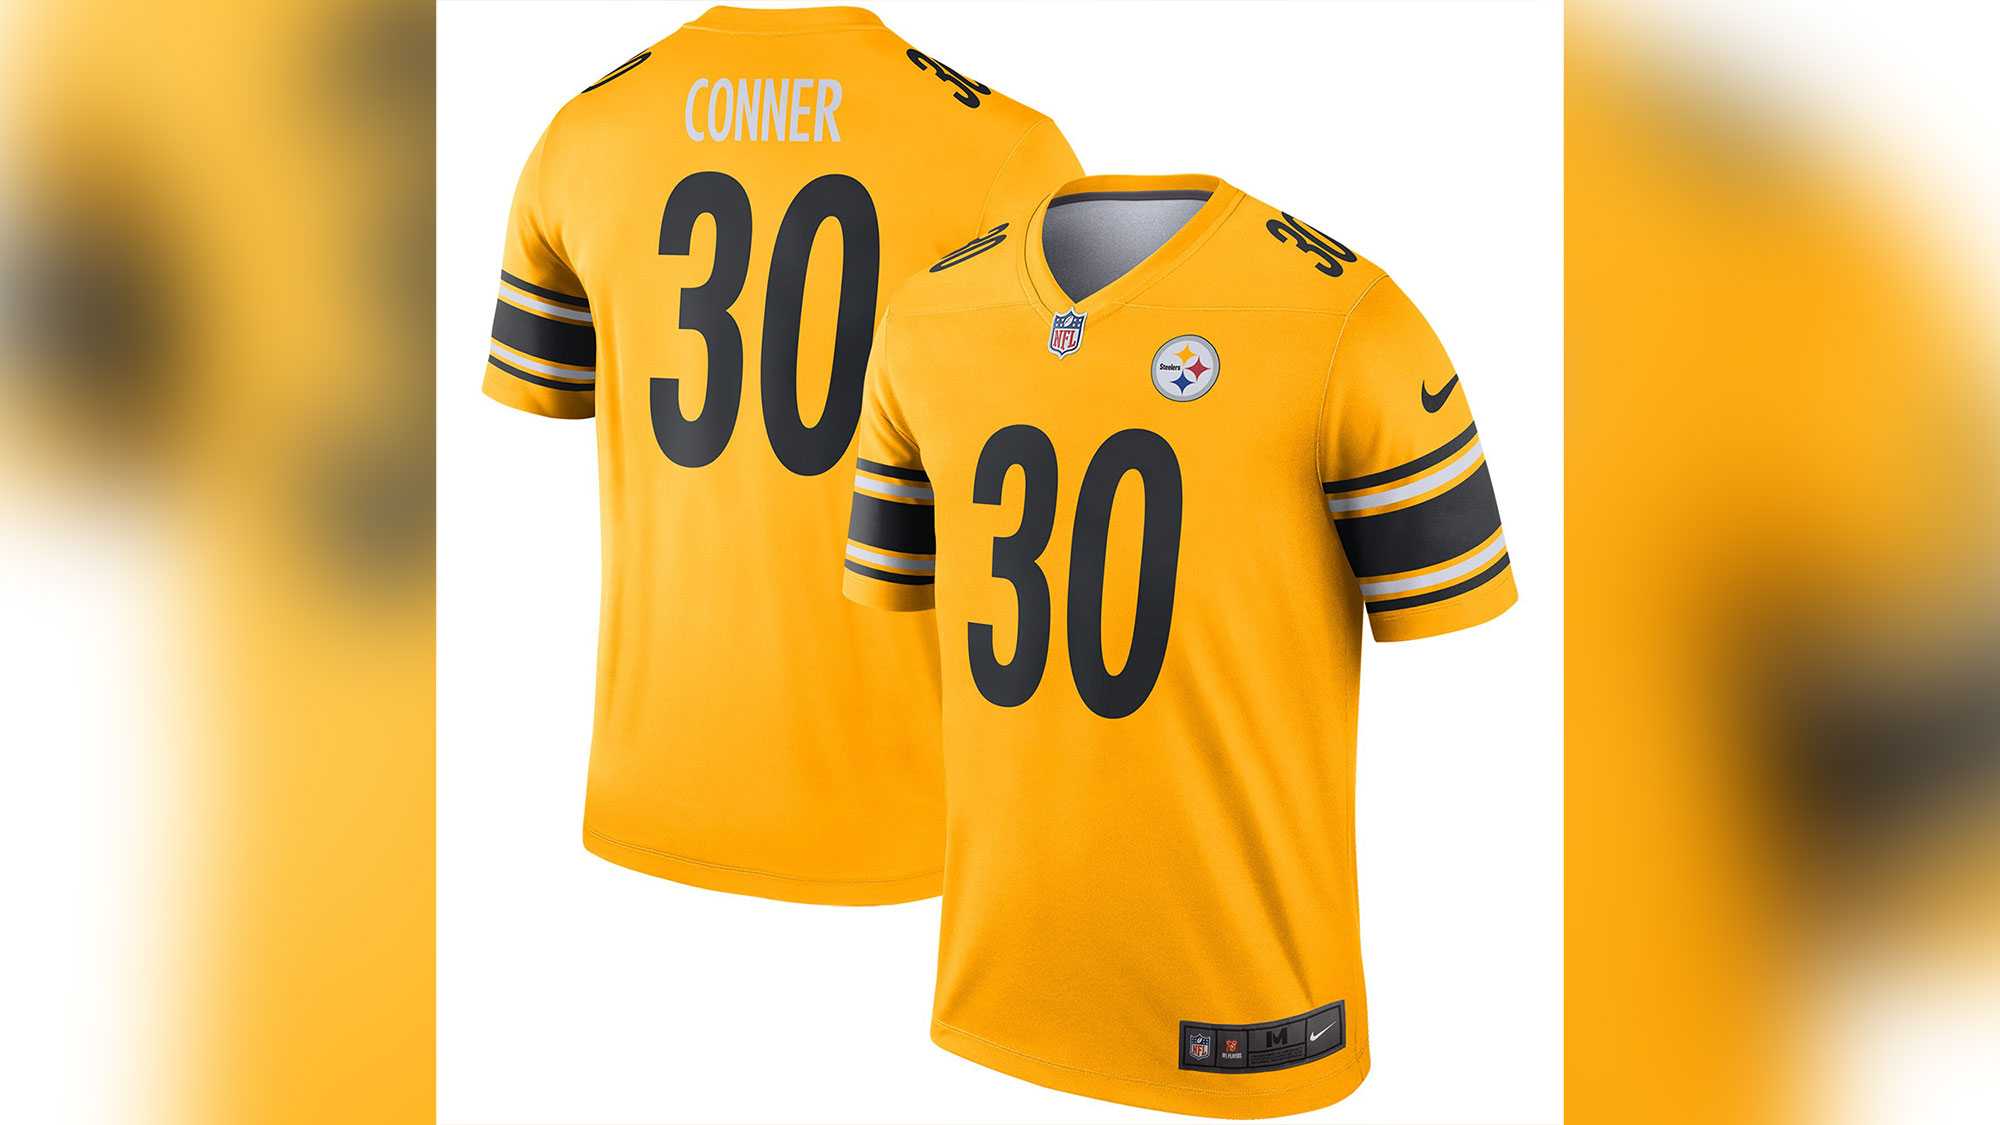 james conner yellow jersey